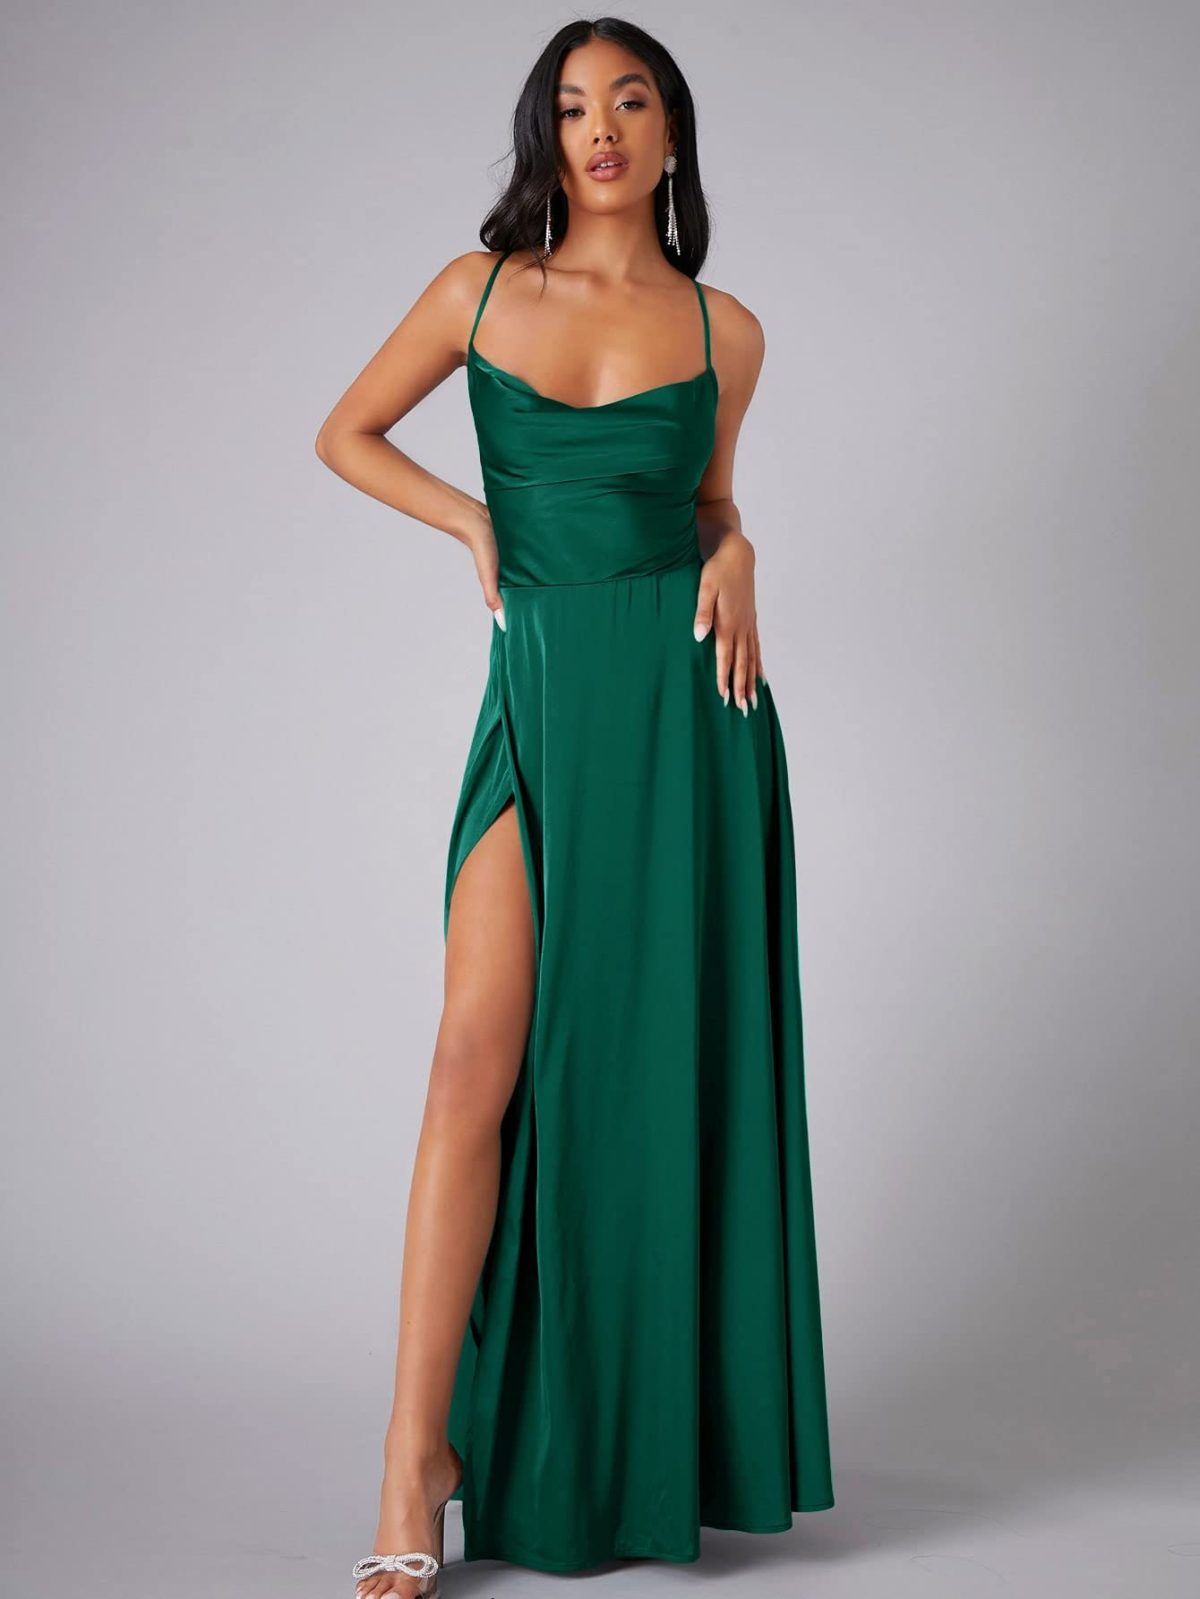 Sexy Slimming Slim Fit Backless Dress in Dresses